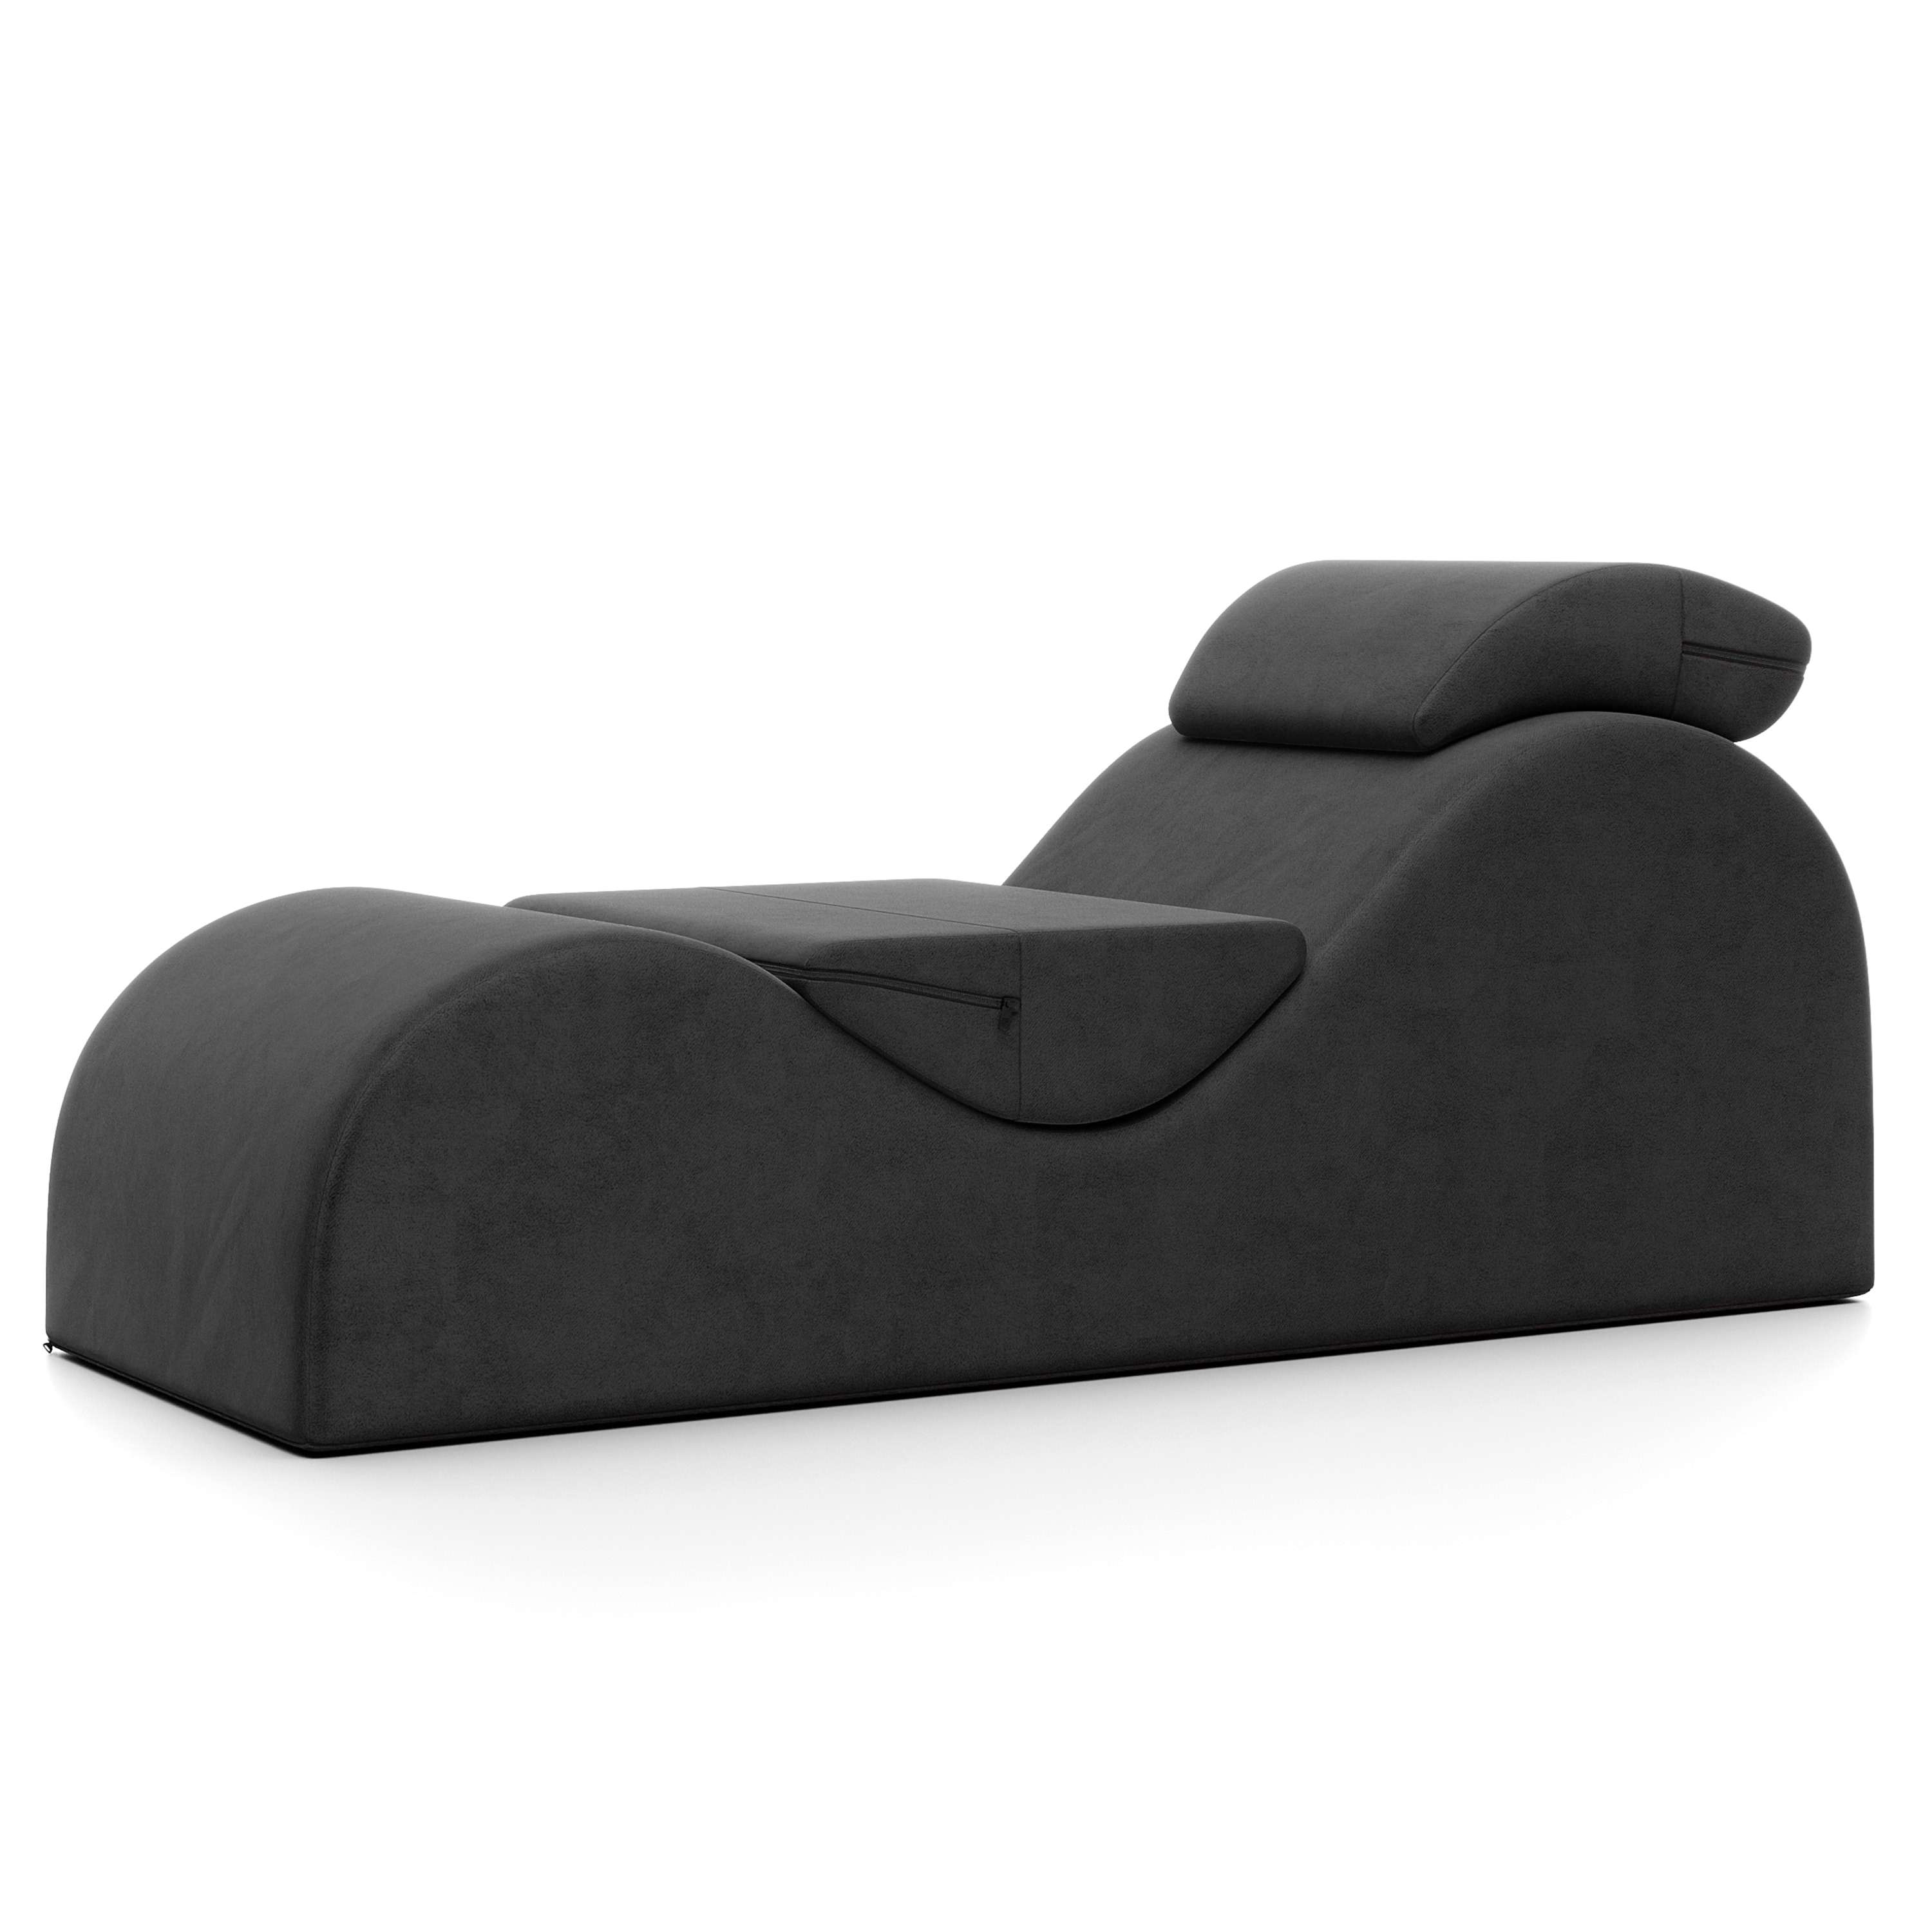 Avana Luvu Lounger - Chaise Lounge Chair for Yoga, Exercise, Stretching,  Massage and More - High Density Foam Core - On Sale - Bed Bath & Beyond -  36140547